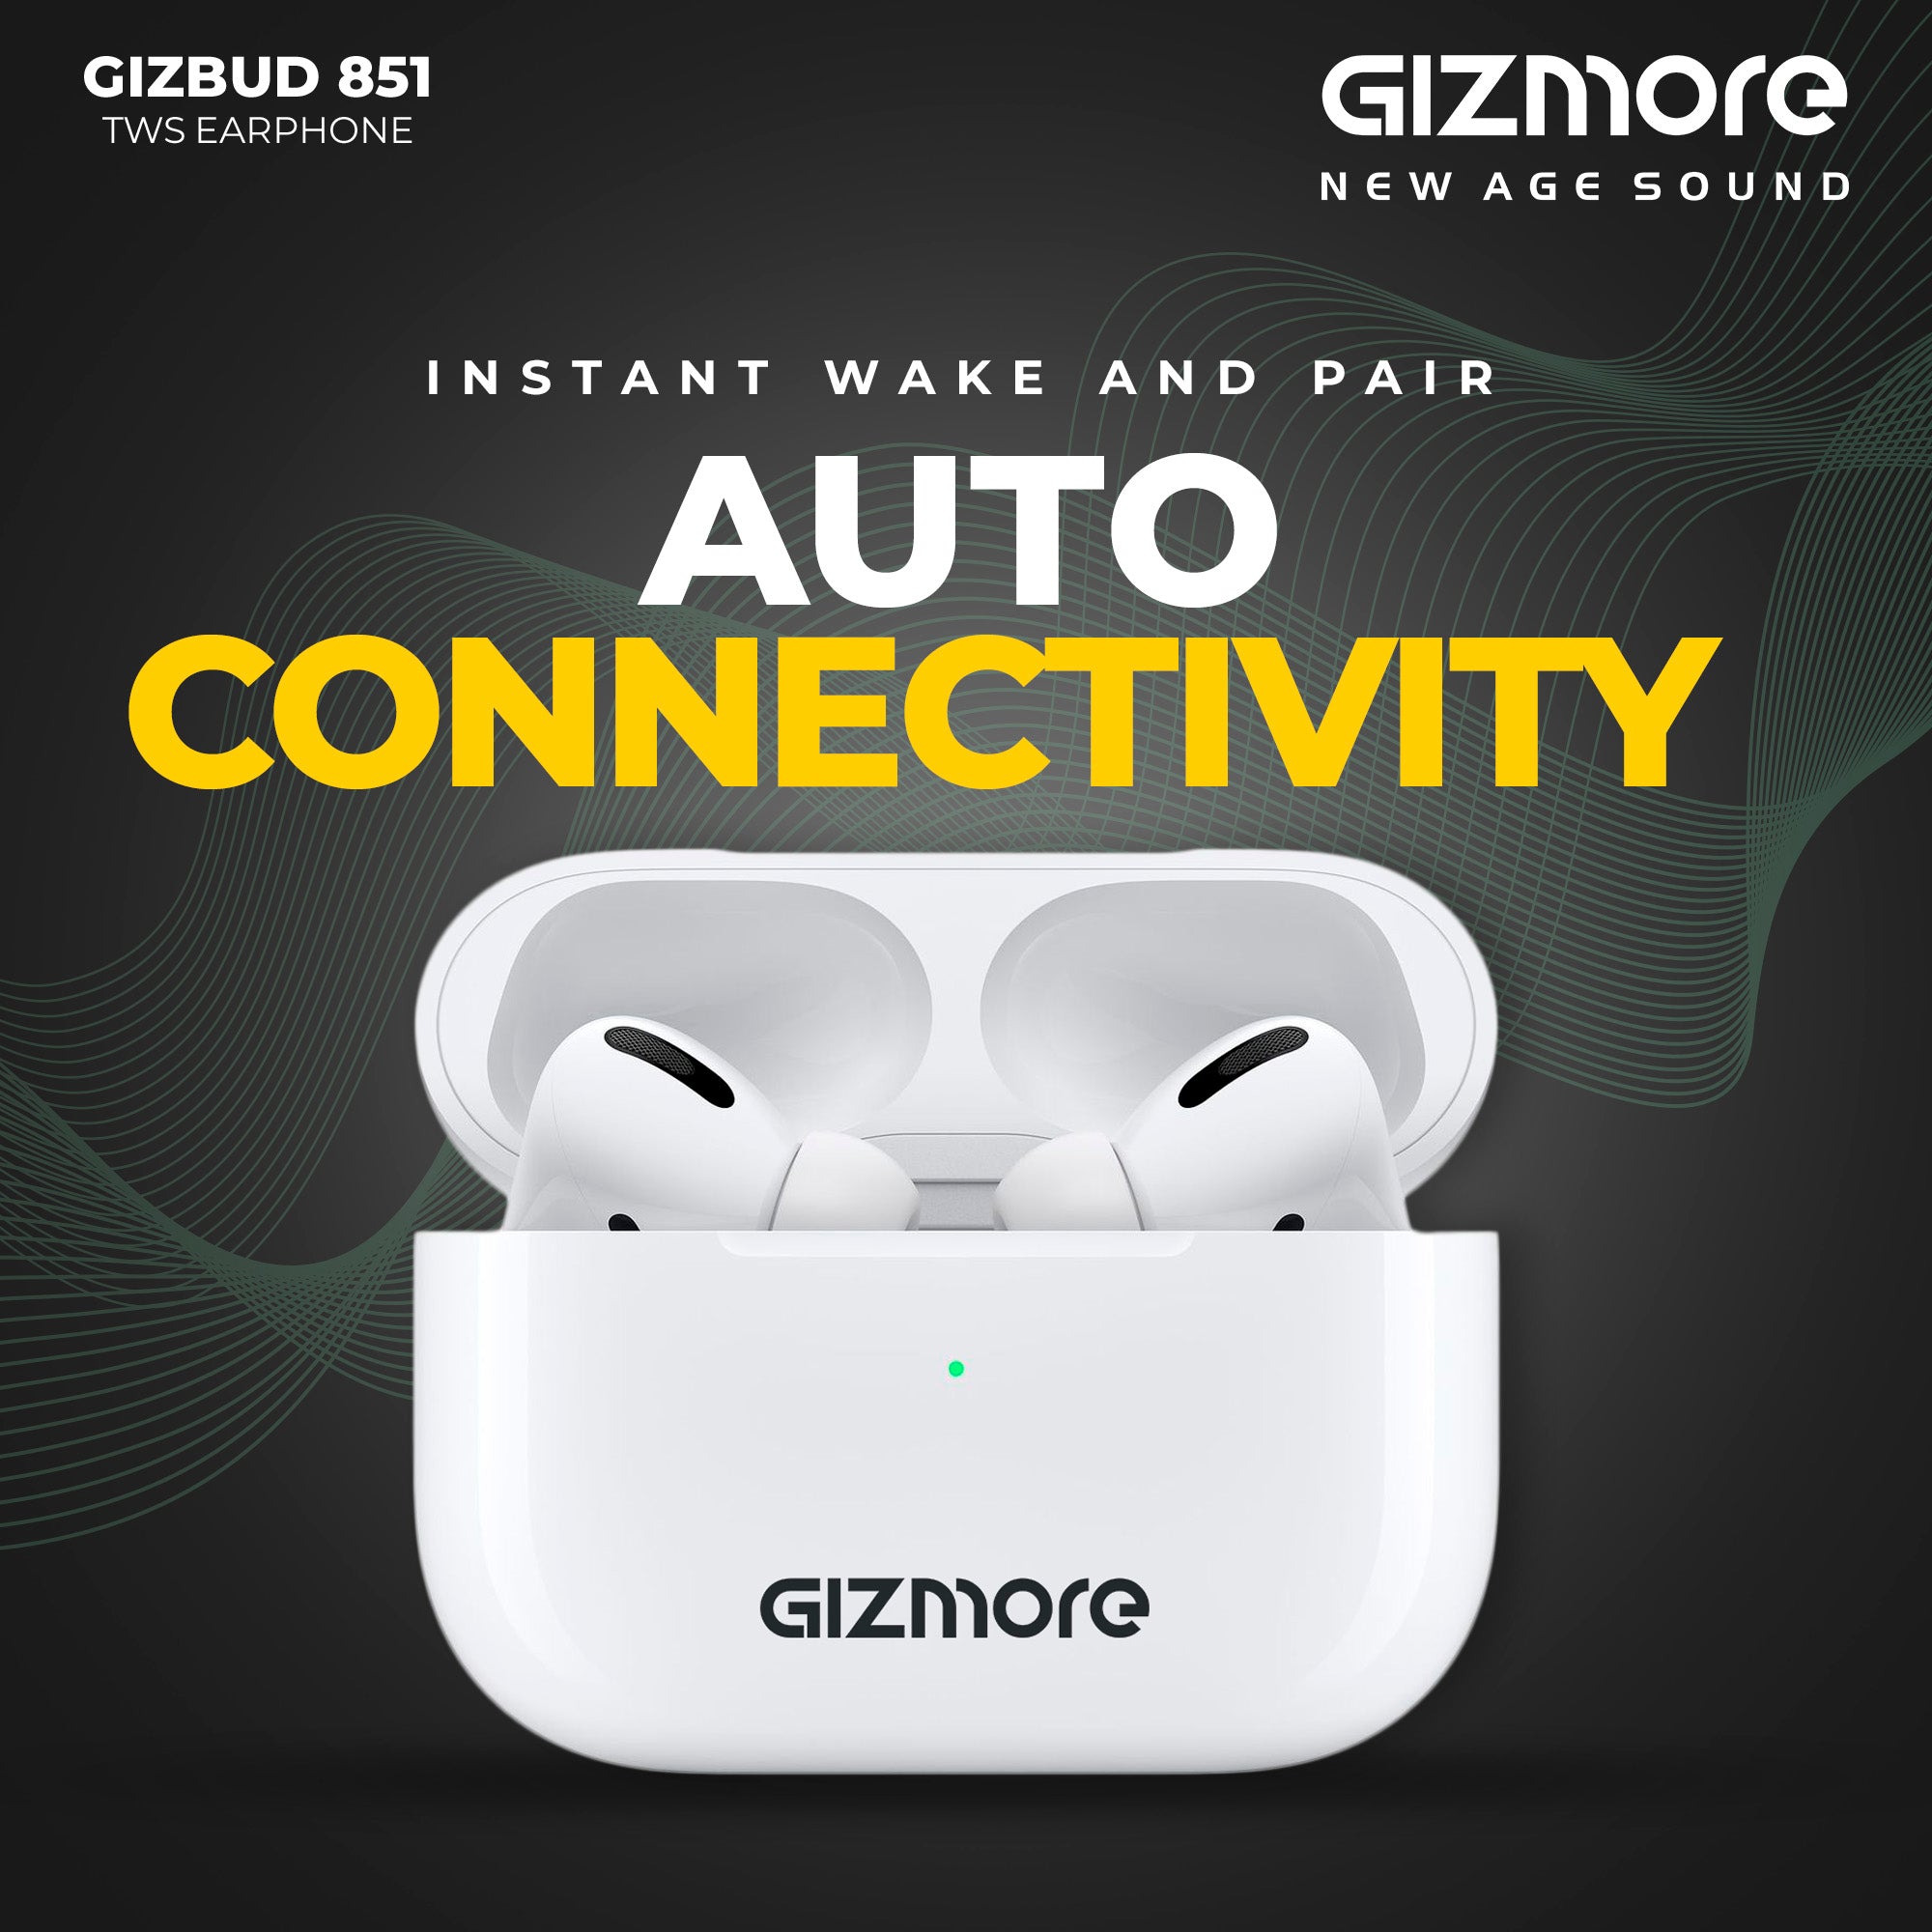 GIZMORE Gizbud 851 Bluetooth 5.0 in-Ear Wireless Earbuds with Noise Isolation | 12 Hrs Playtime, Touch Control, and Voice Assistance